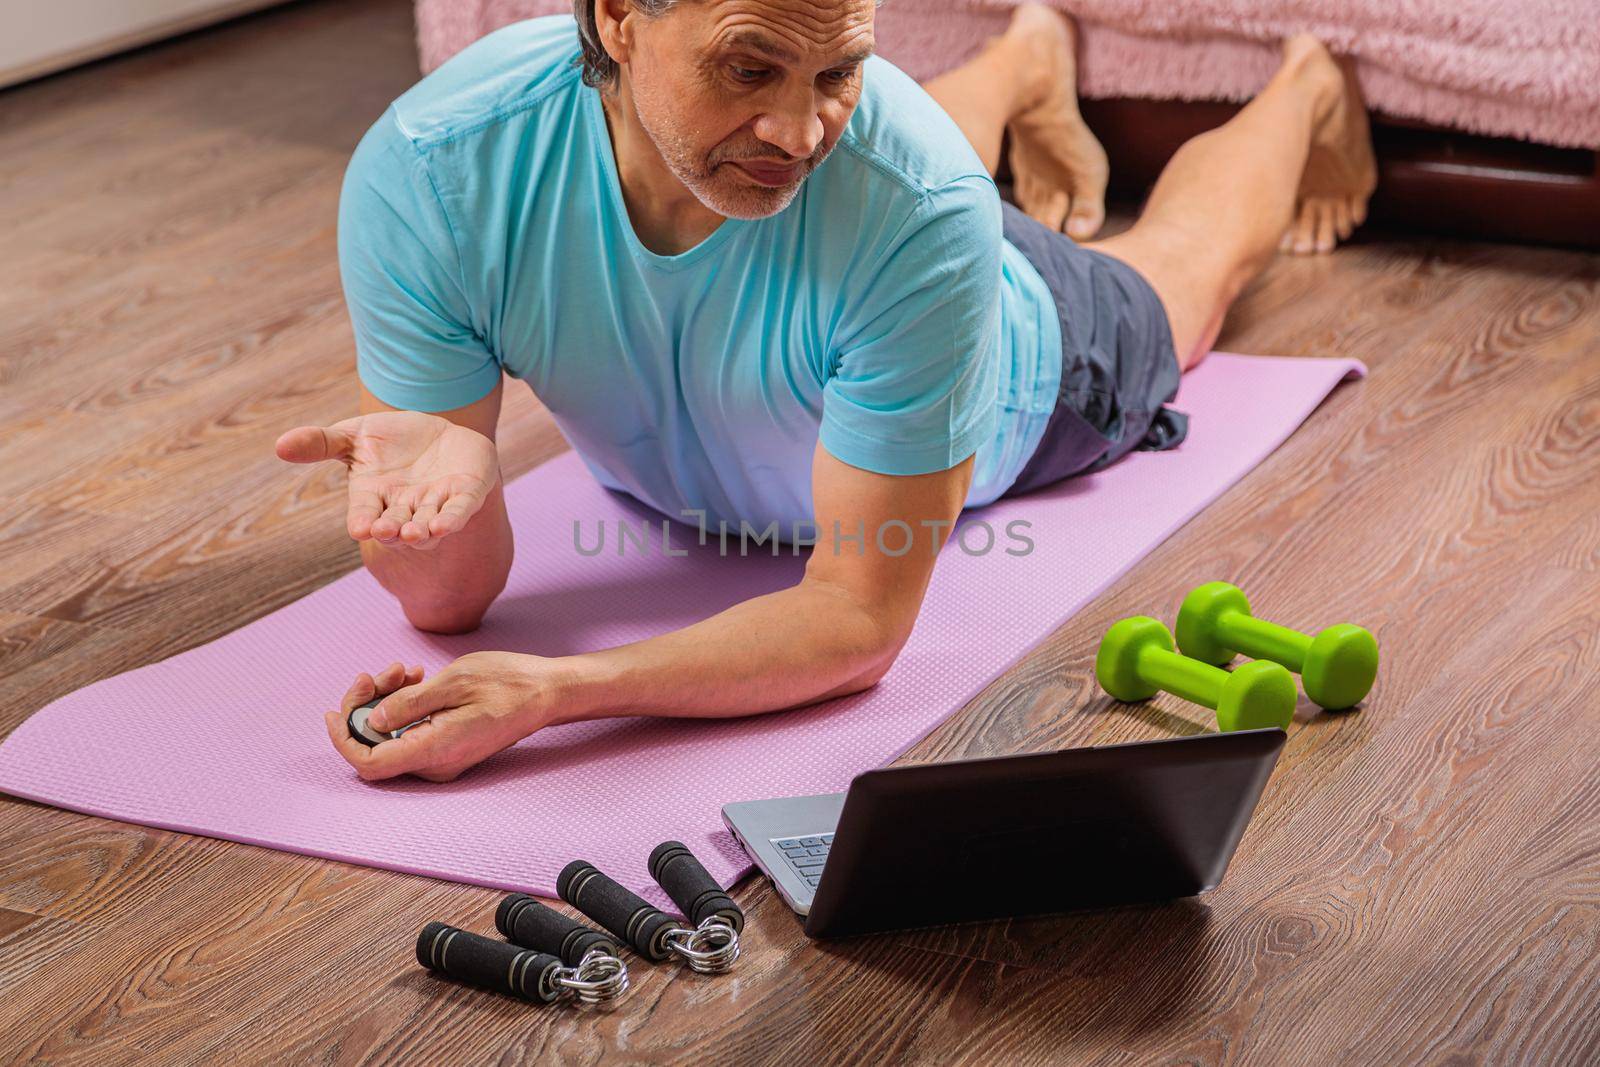 50 year old man performs exercises lying on mat at home looking at computer by Yurich32